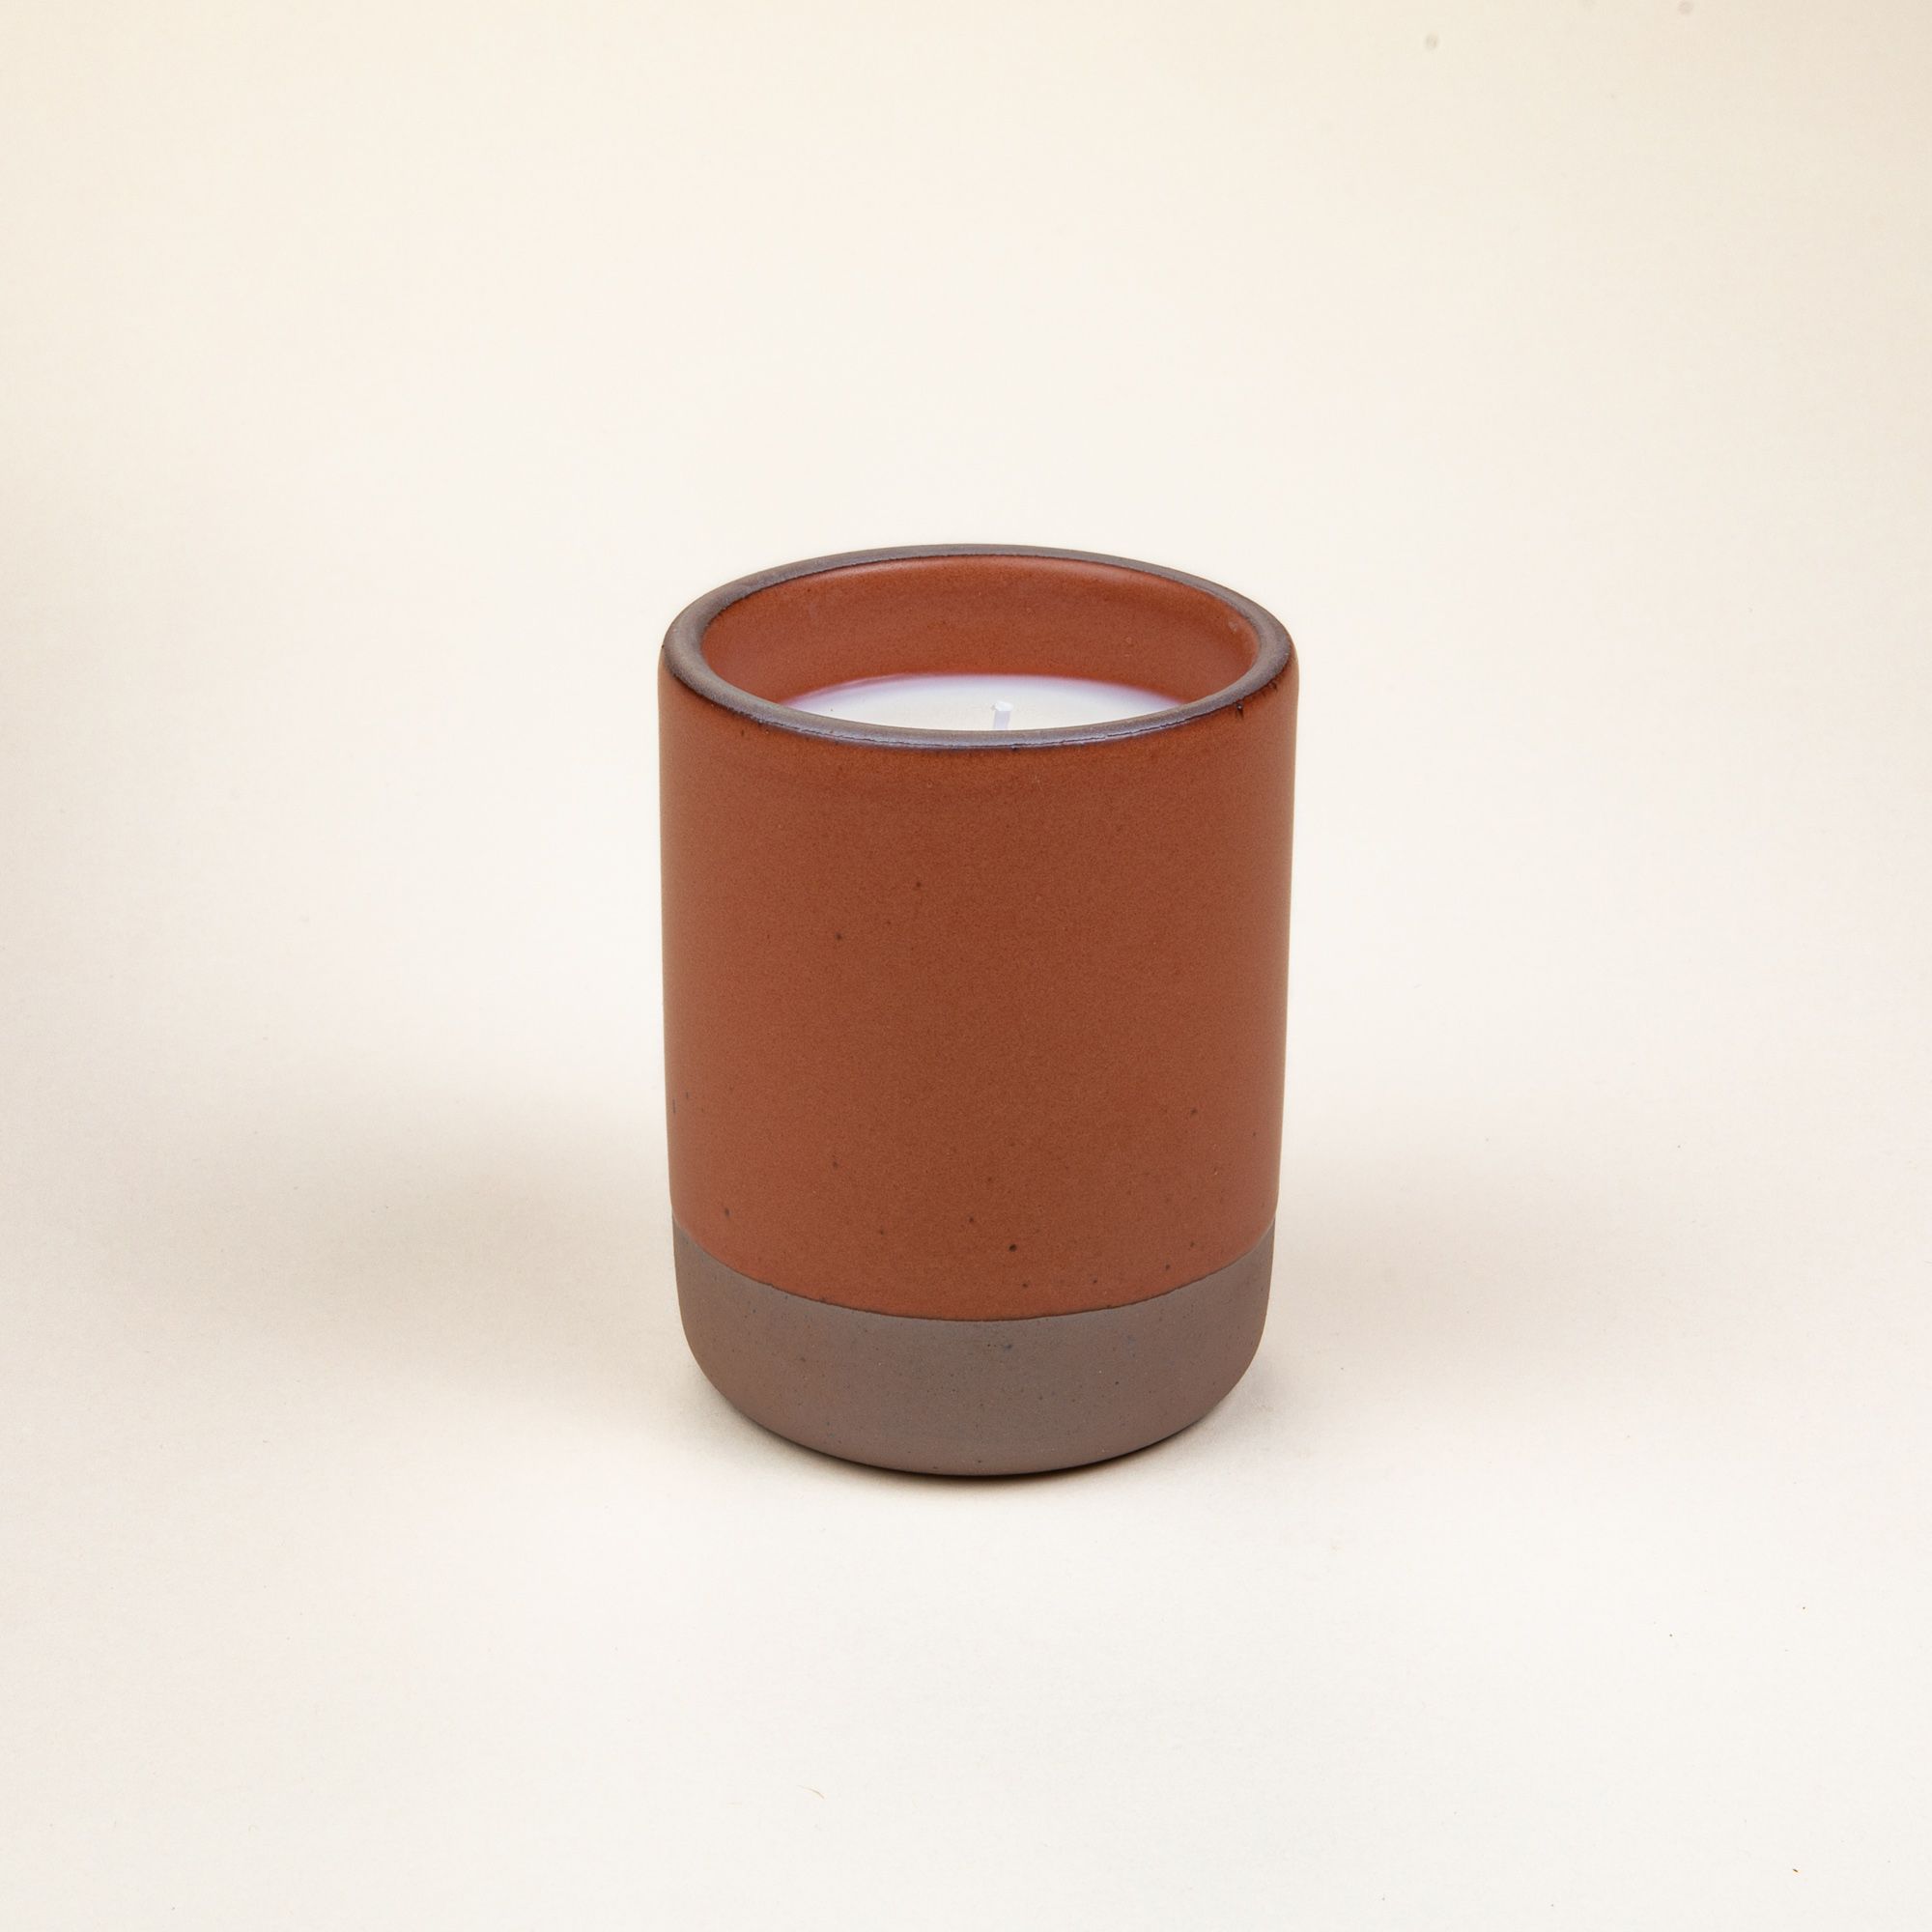 Large ceramic vessel in a cool terracotta color with candle inside.